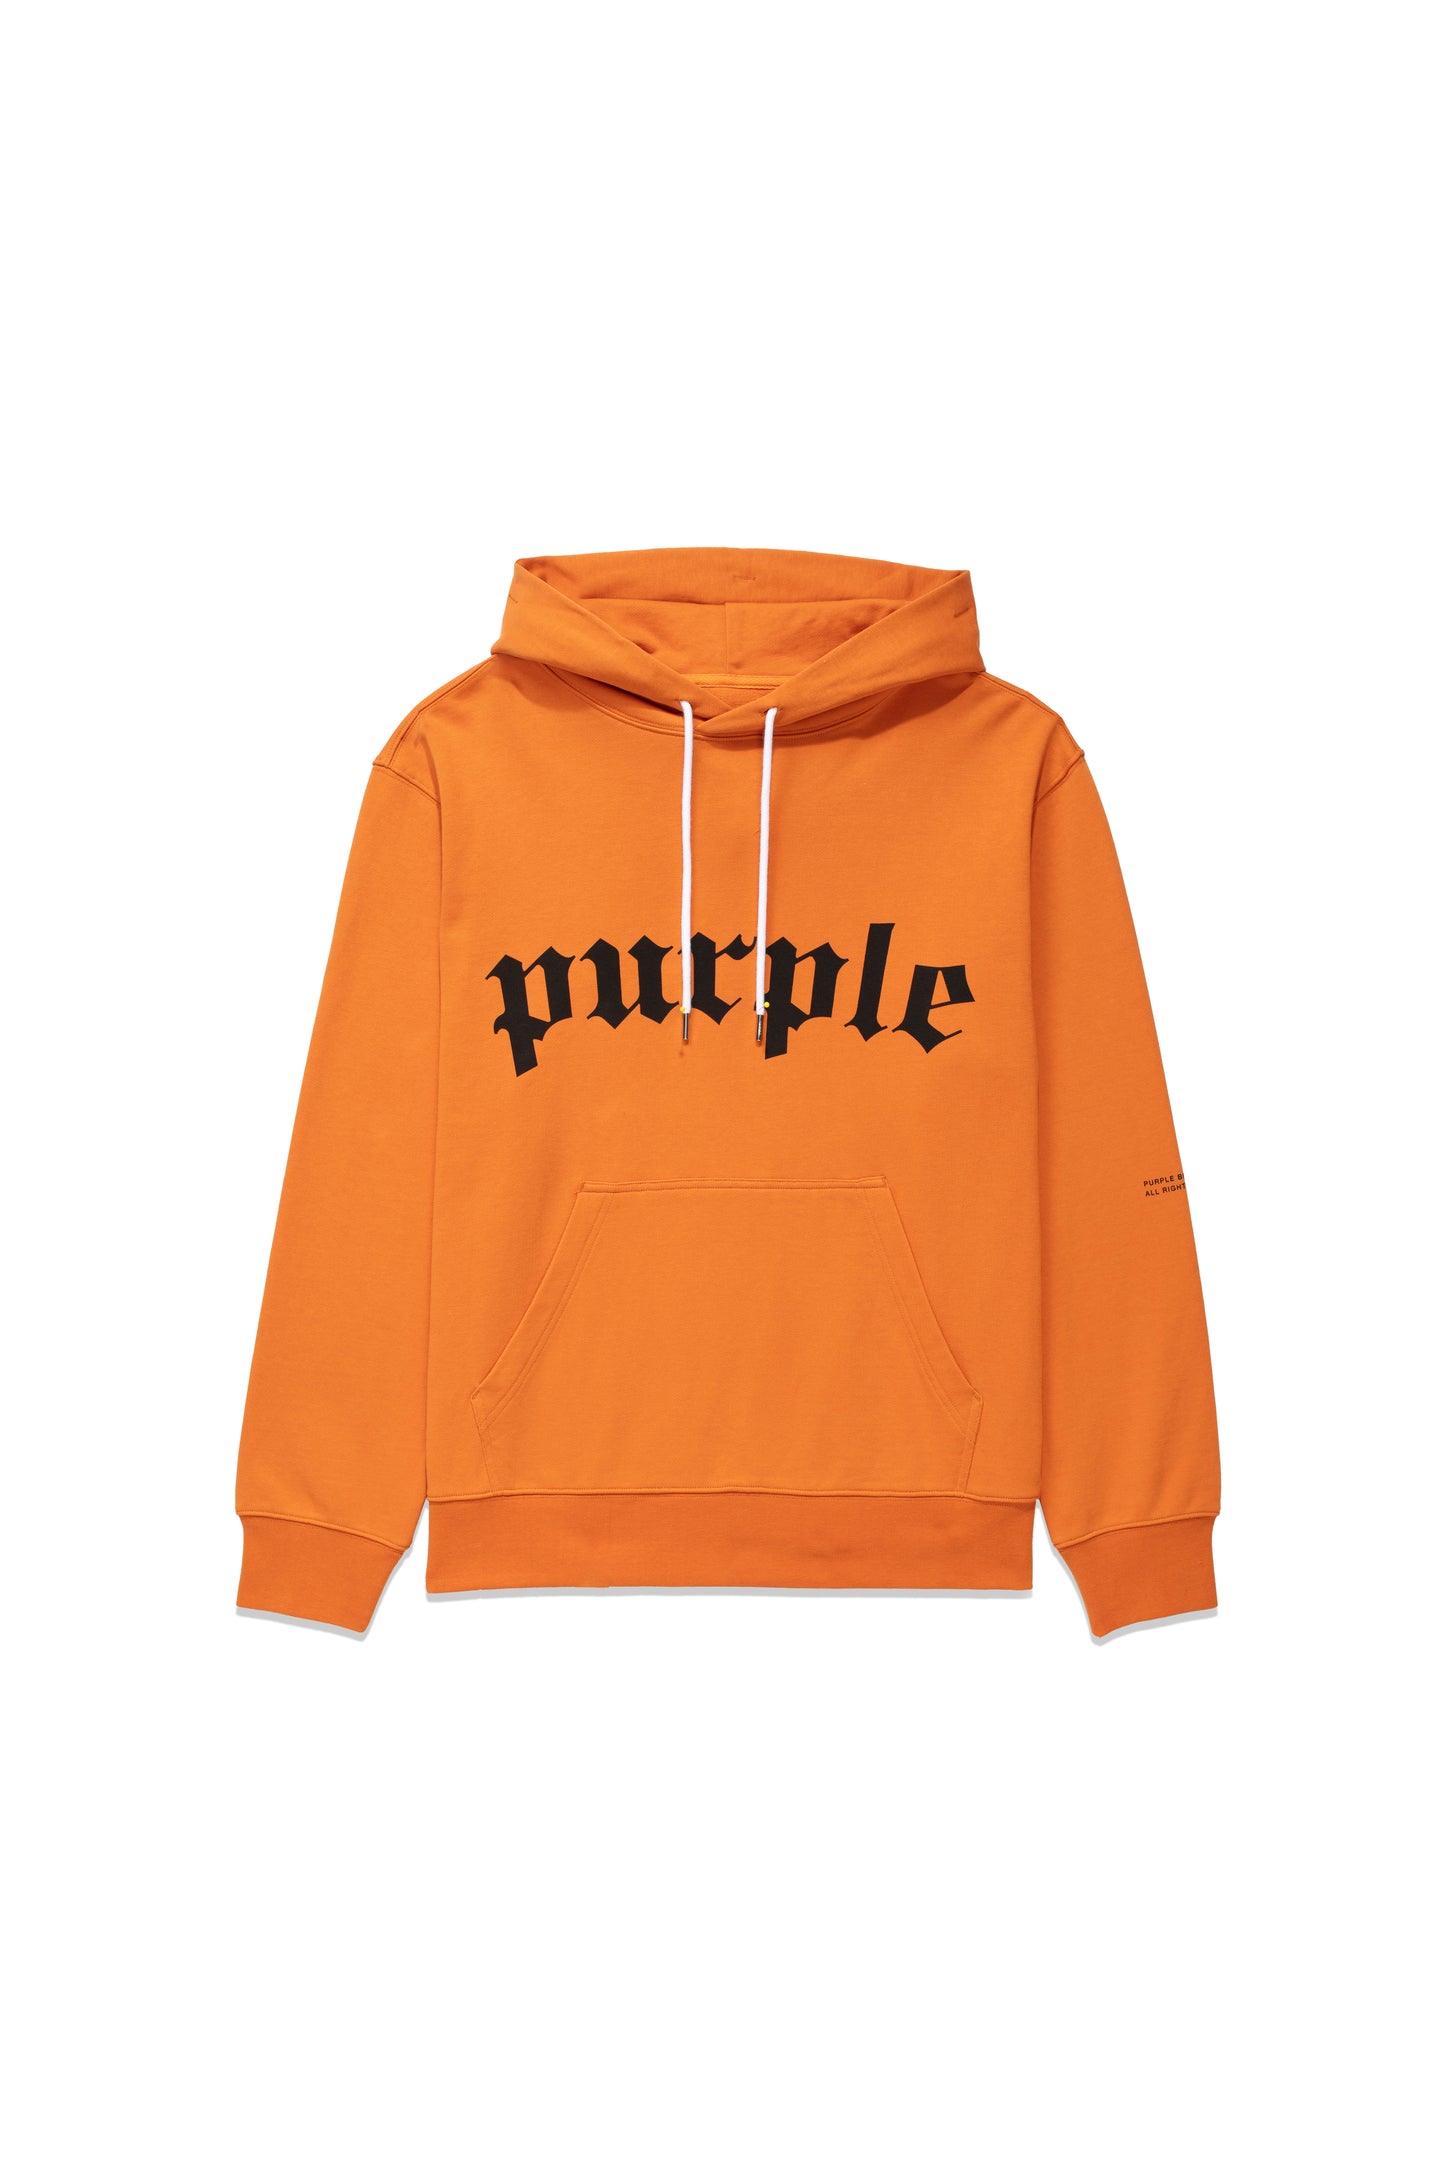 P410 REGULAR FIT HOODIE - Gothic Arch Marmalade